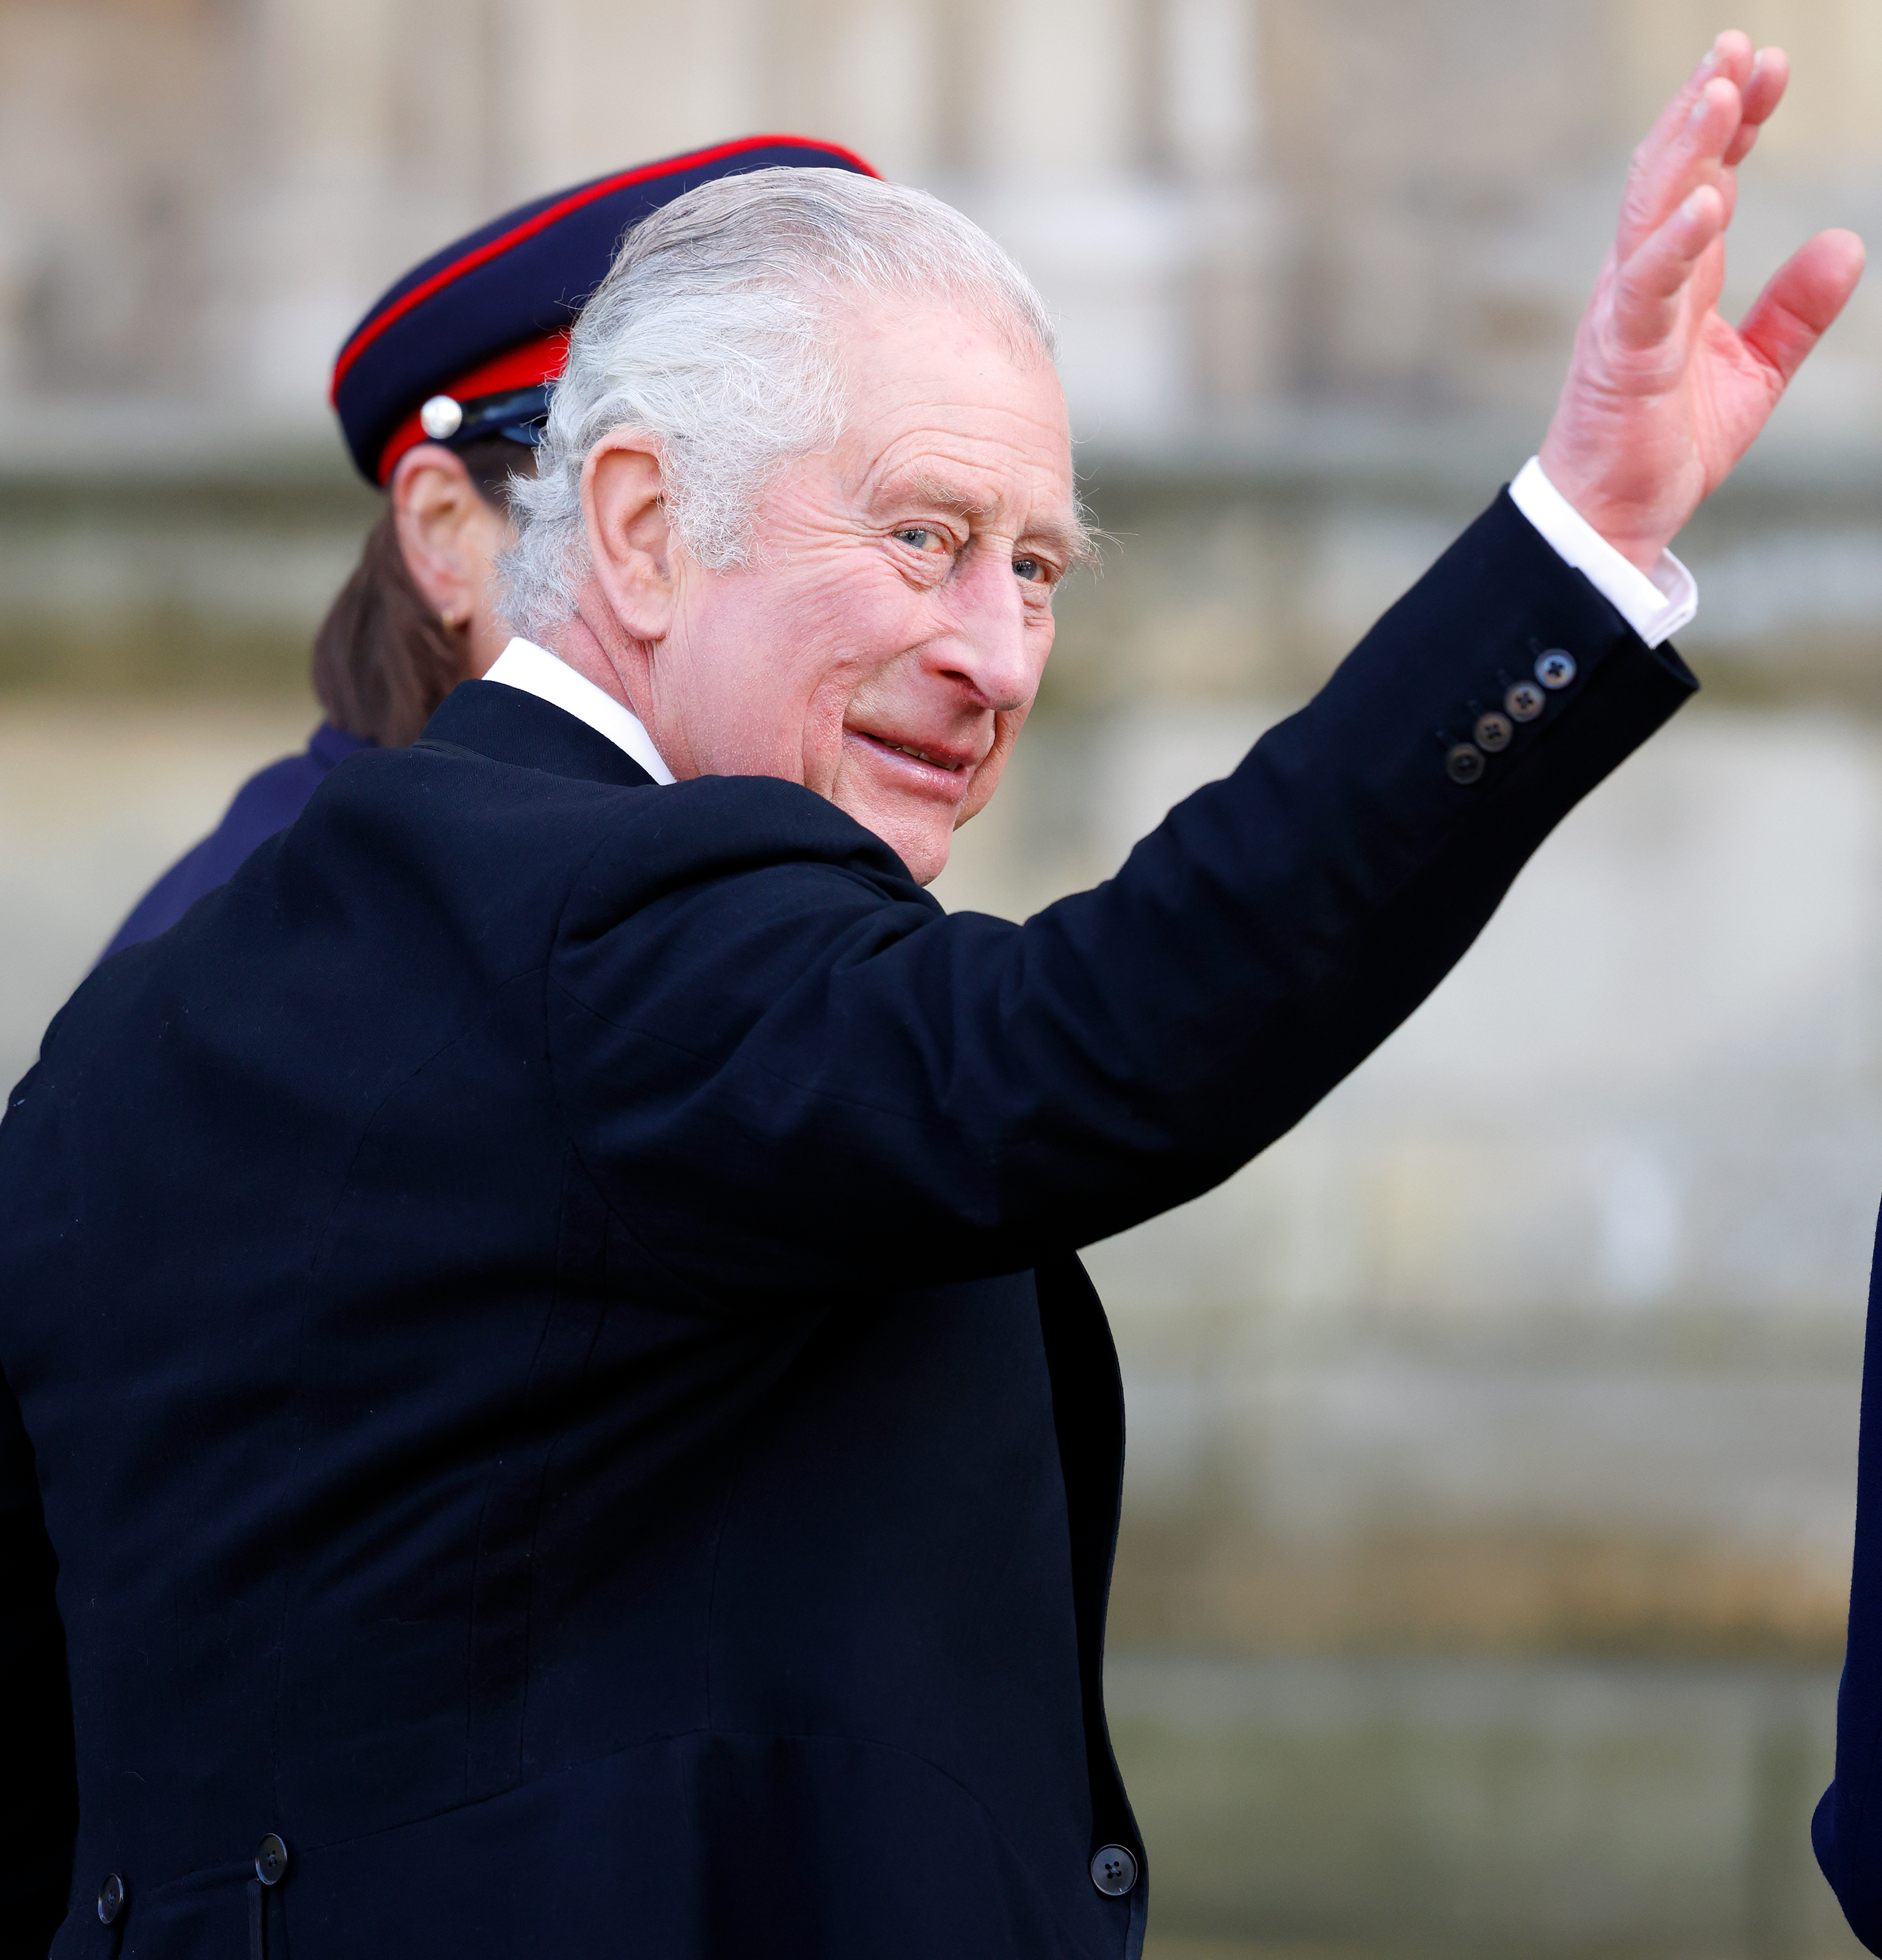 King Charles III waves to the public during the Royal Maundy Service at York Minster on April 6, 2023, in York, England. | Source: Getty Images